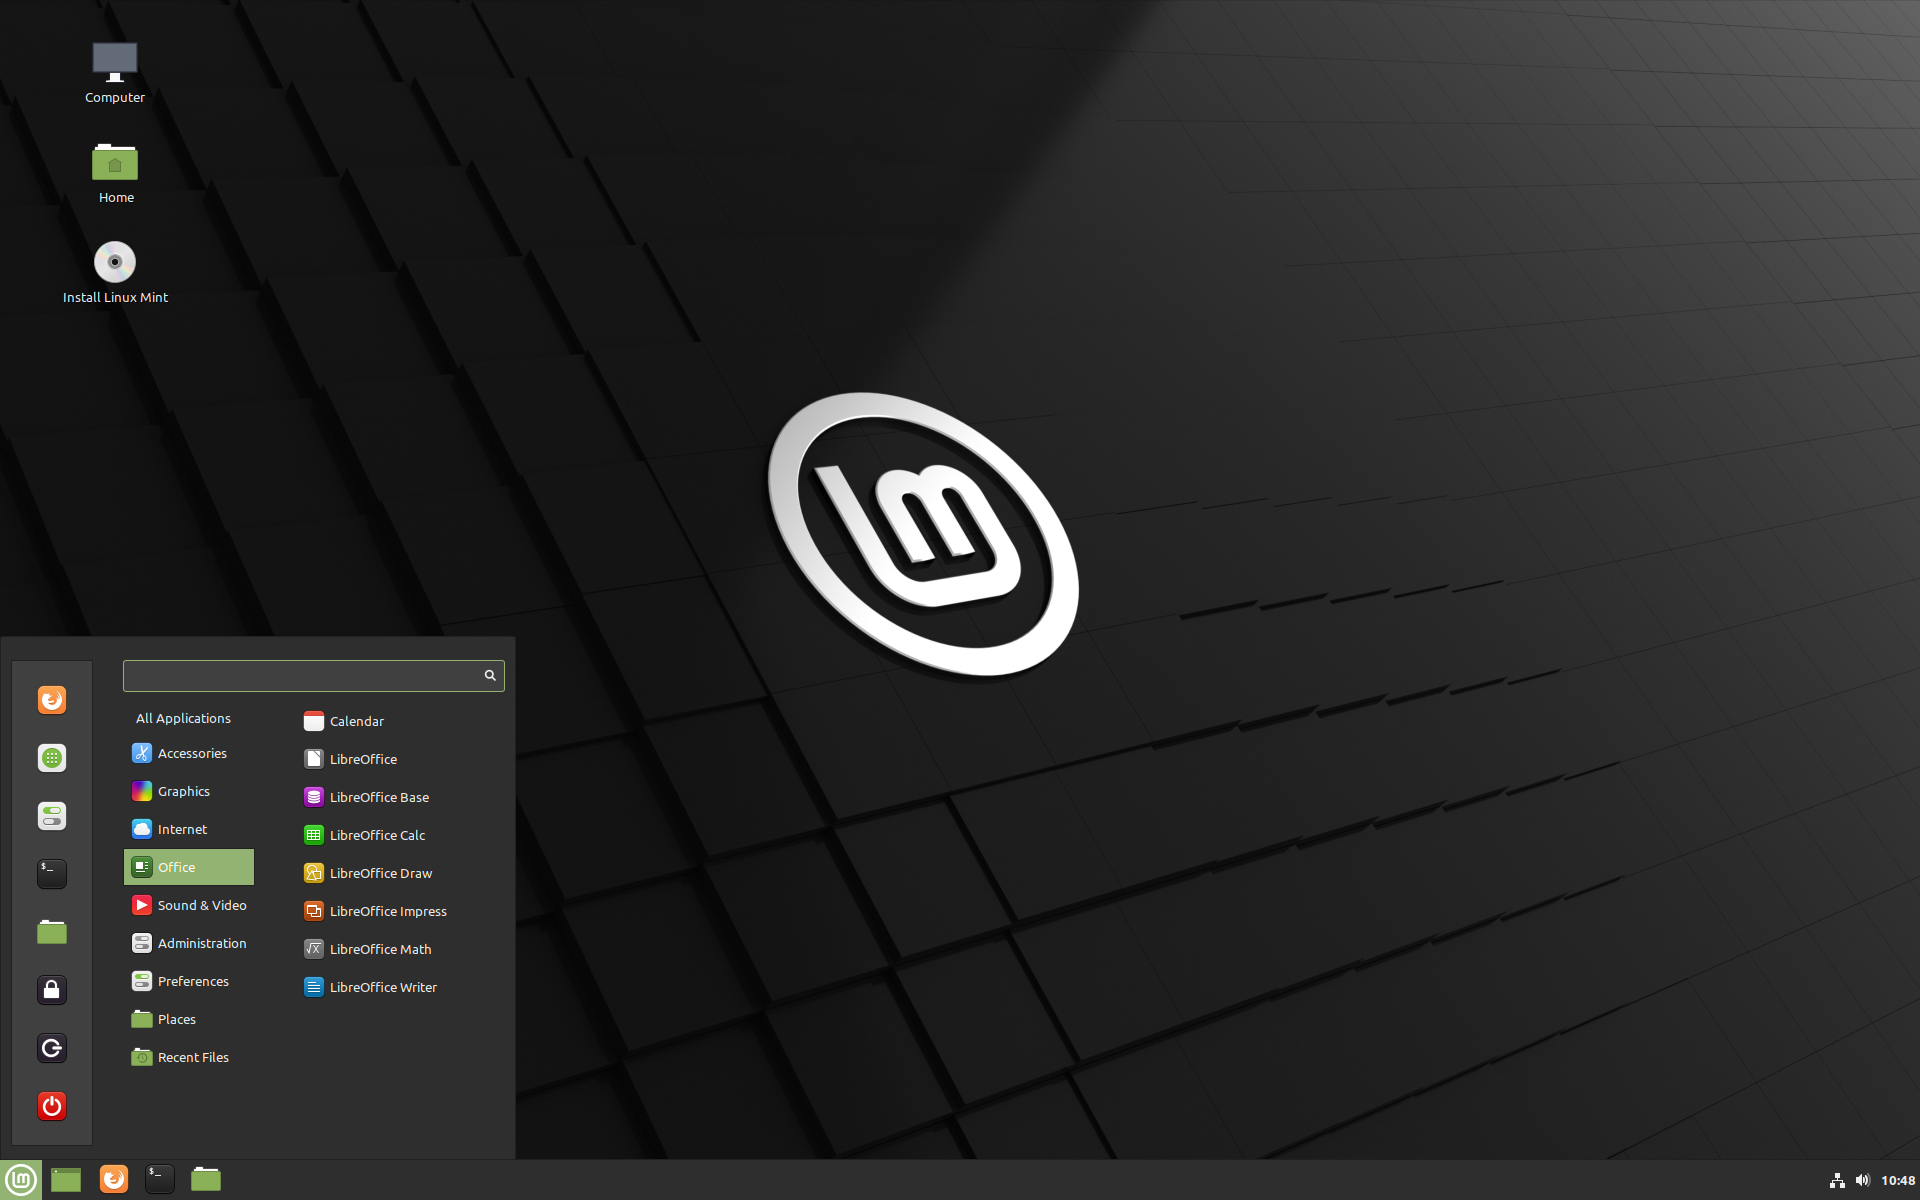 Linux Mint 20.2 Interface
best Linux distros for beginners